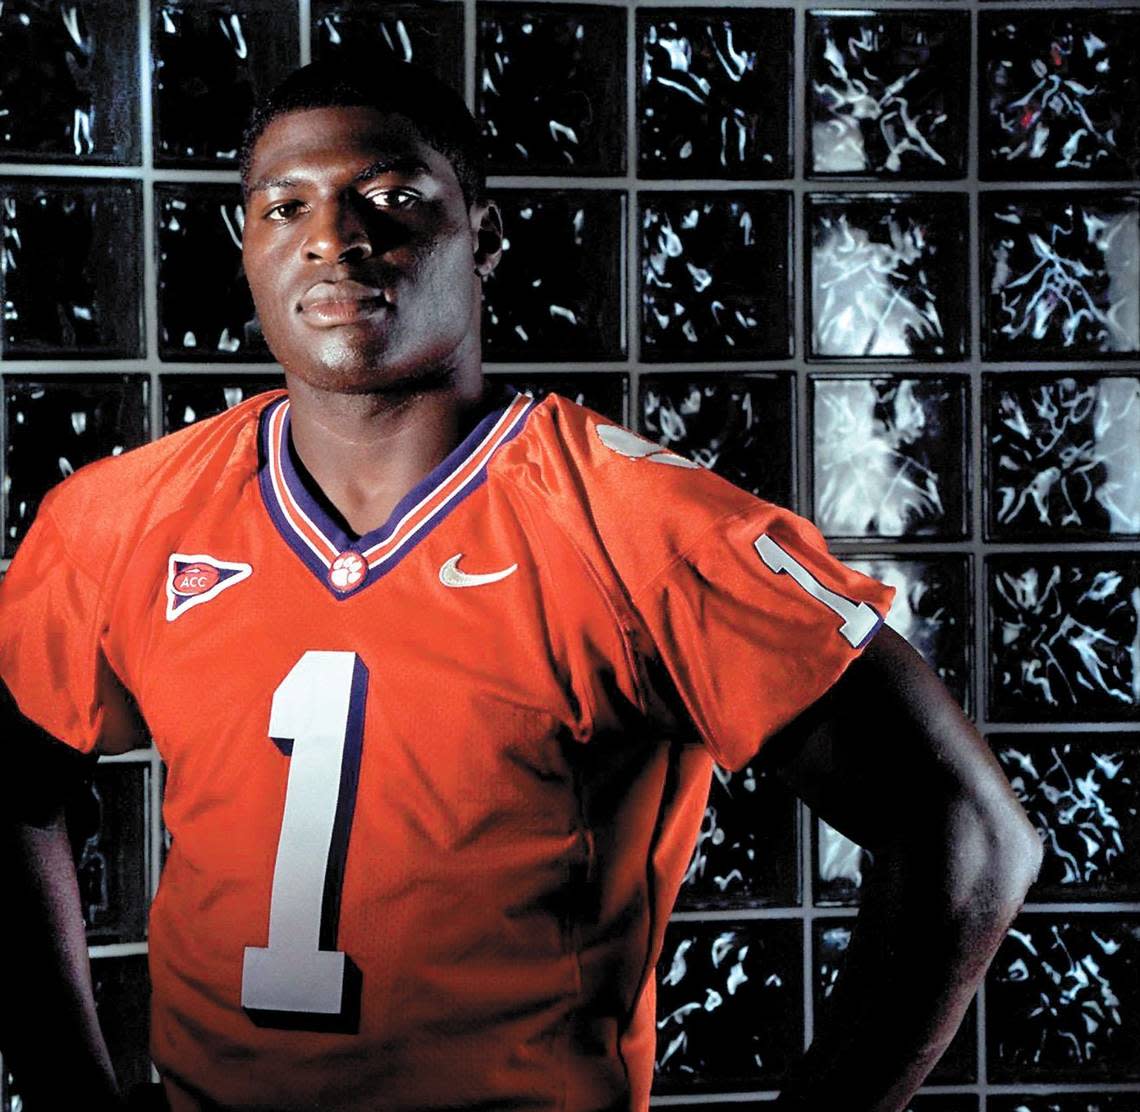 Former Clemson quarterback Woody Dantzler, pictured here in 2002, will be inducted into the South Carolina Athletic Hall of Fame on Monday in Columbia.